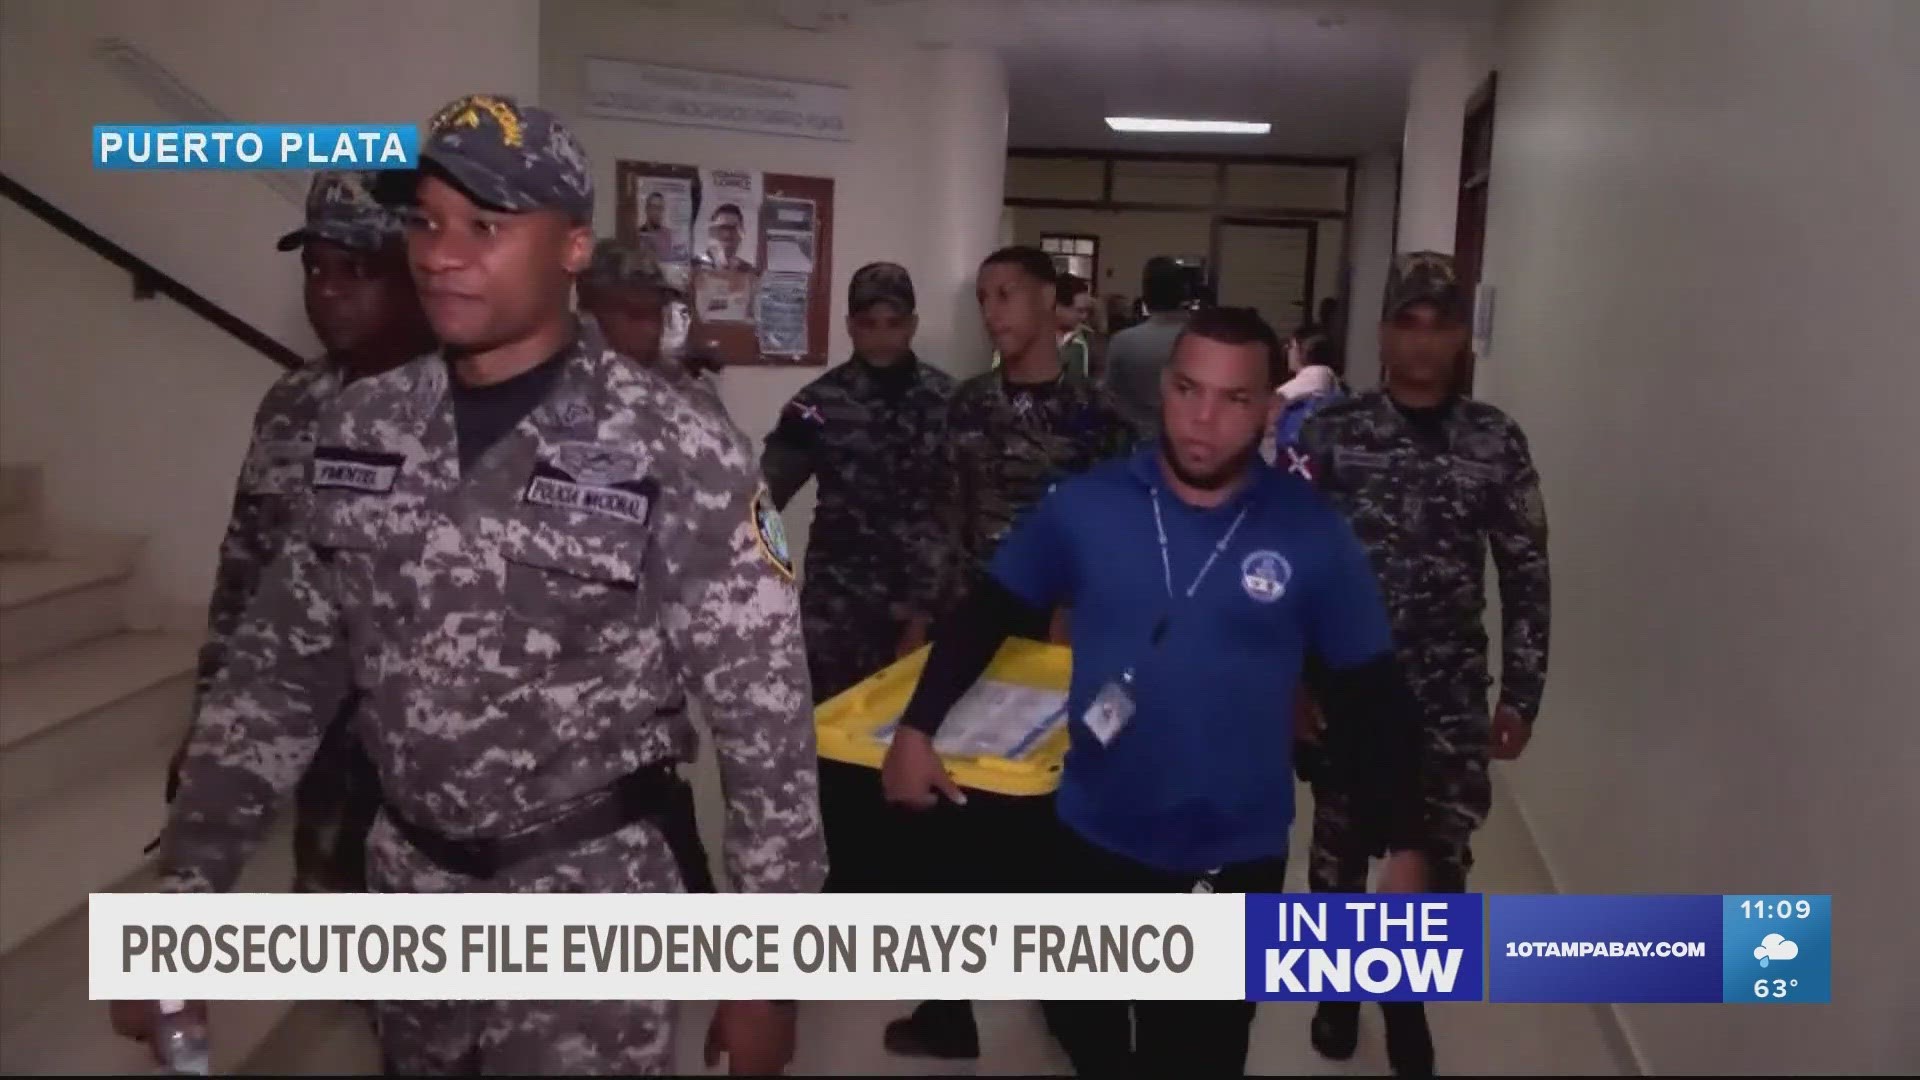 Prosecutors said the money laundering charges stem from allegations that Franco made payments to the mother of a minor he was in a relationship with.